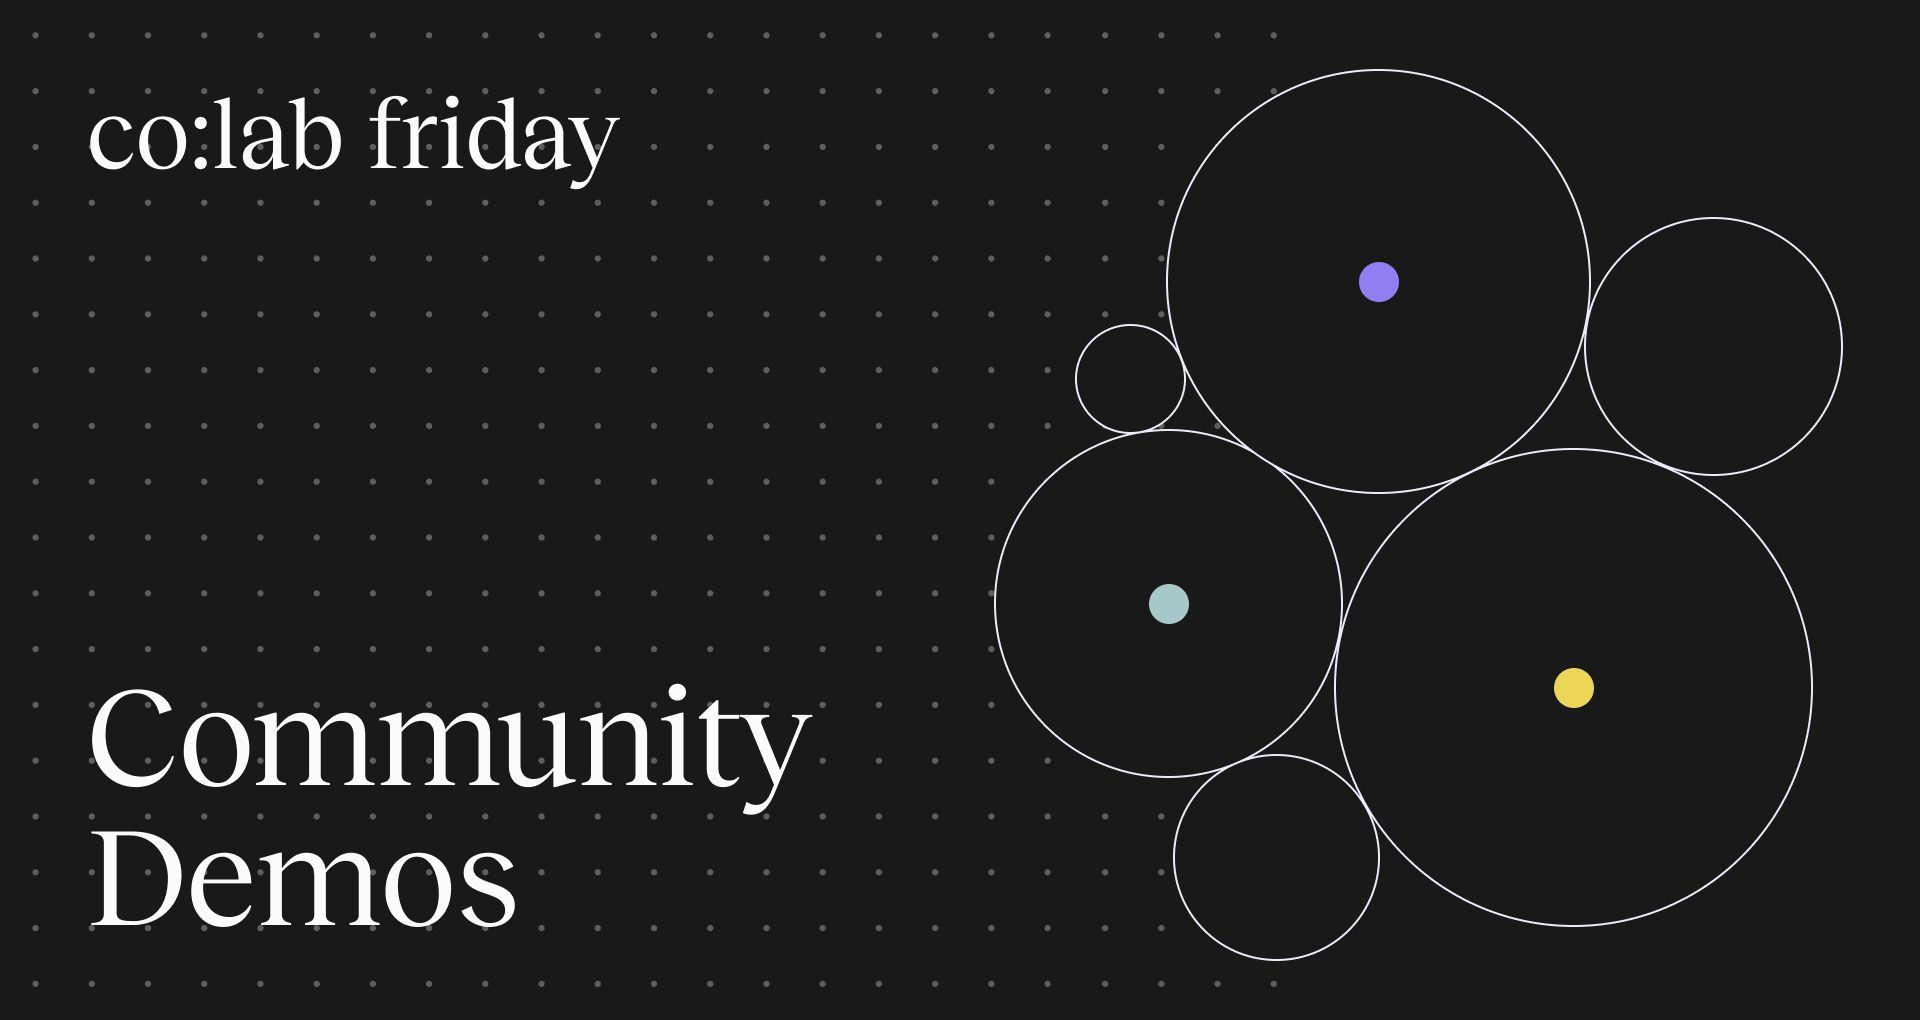 Share Your Demo Project with the Community at Our New co:lab friday Events